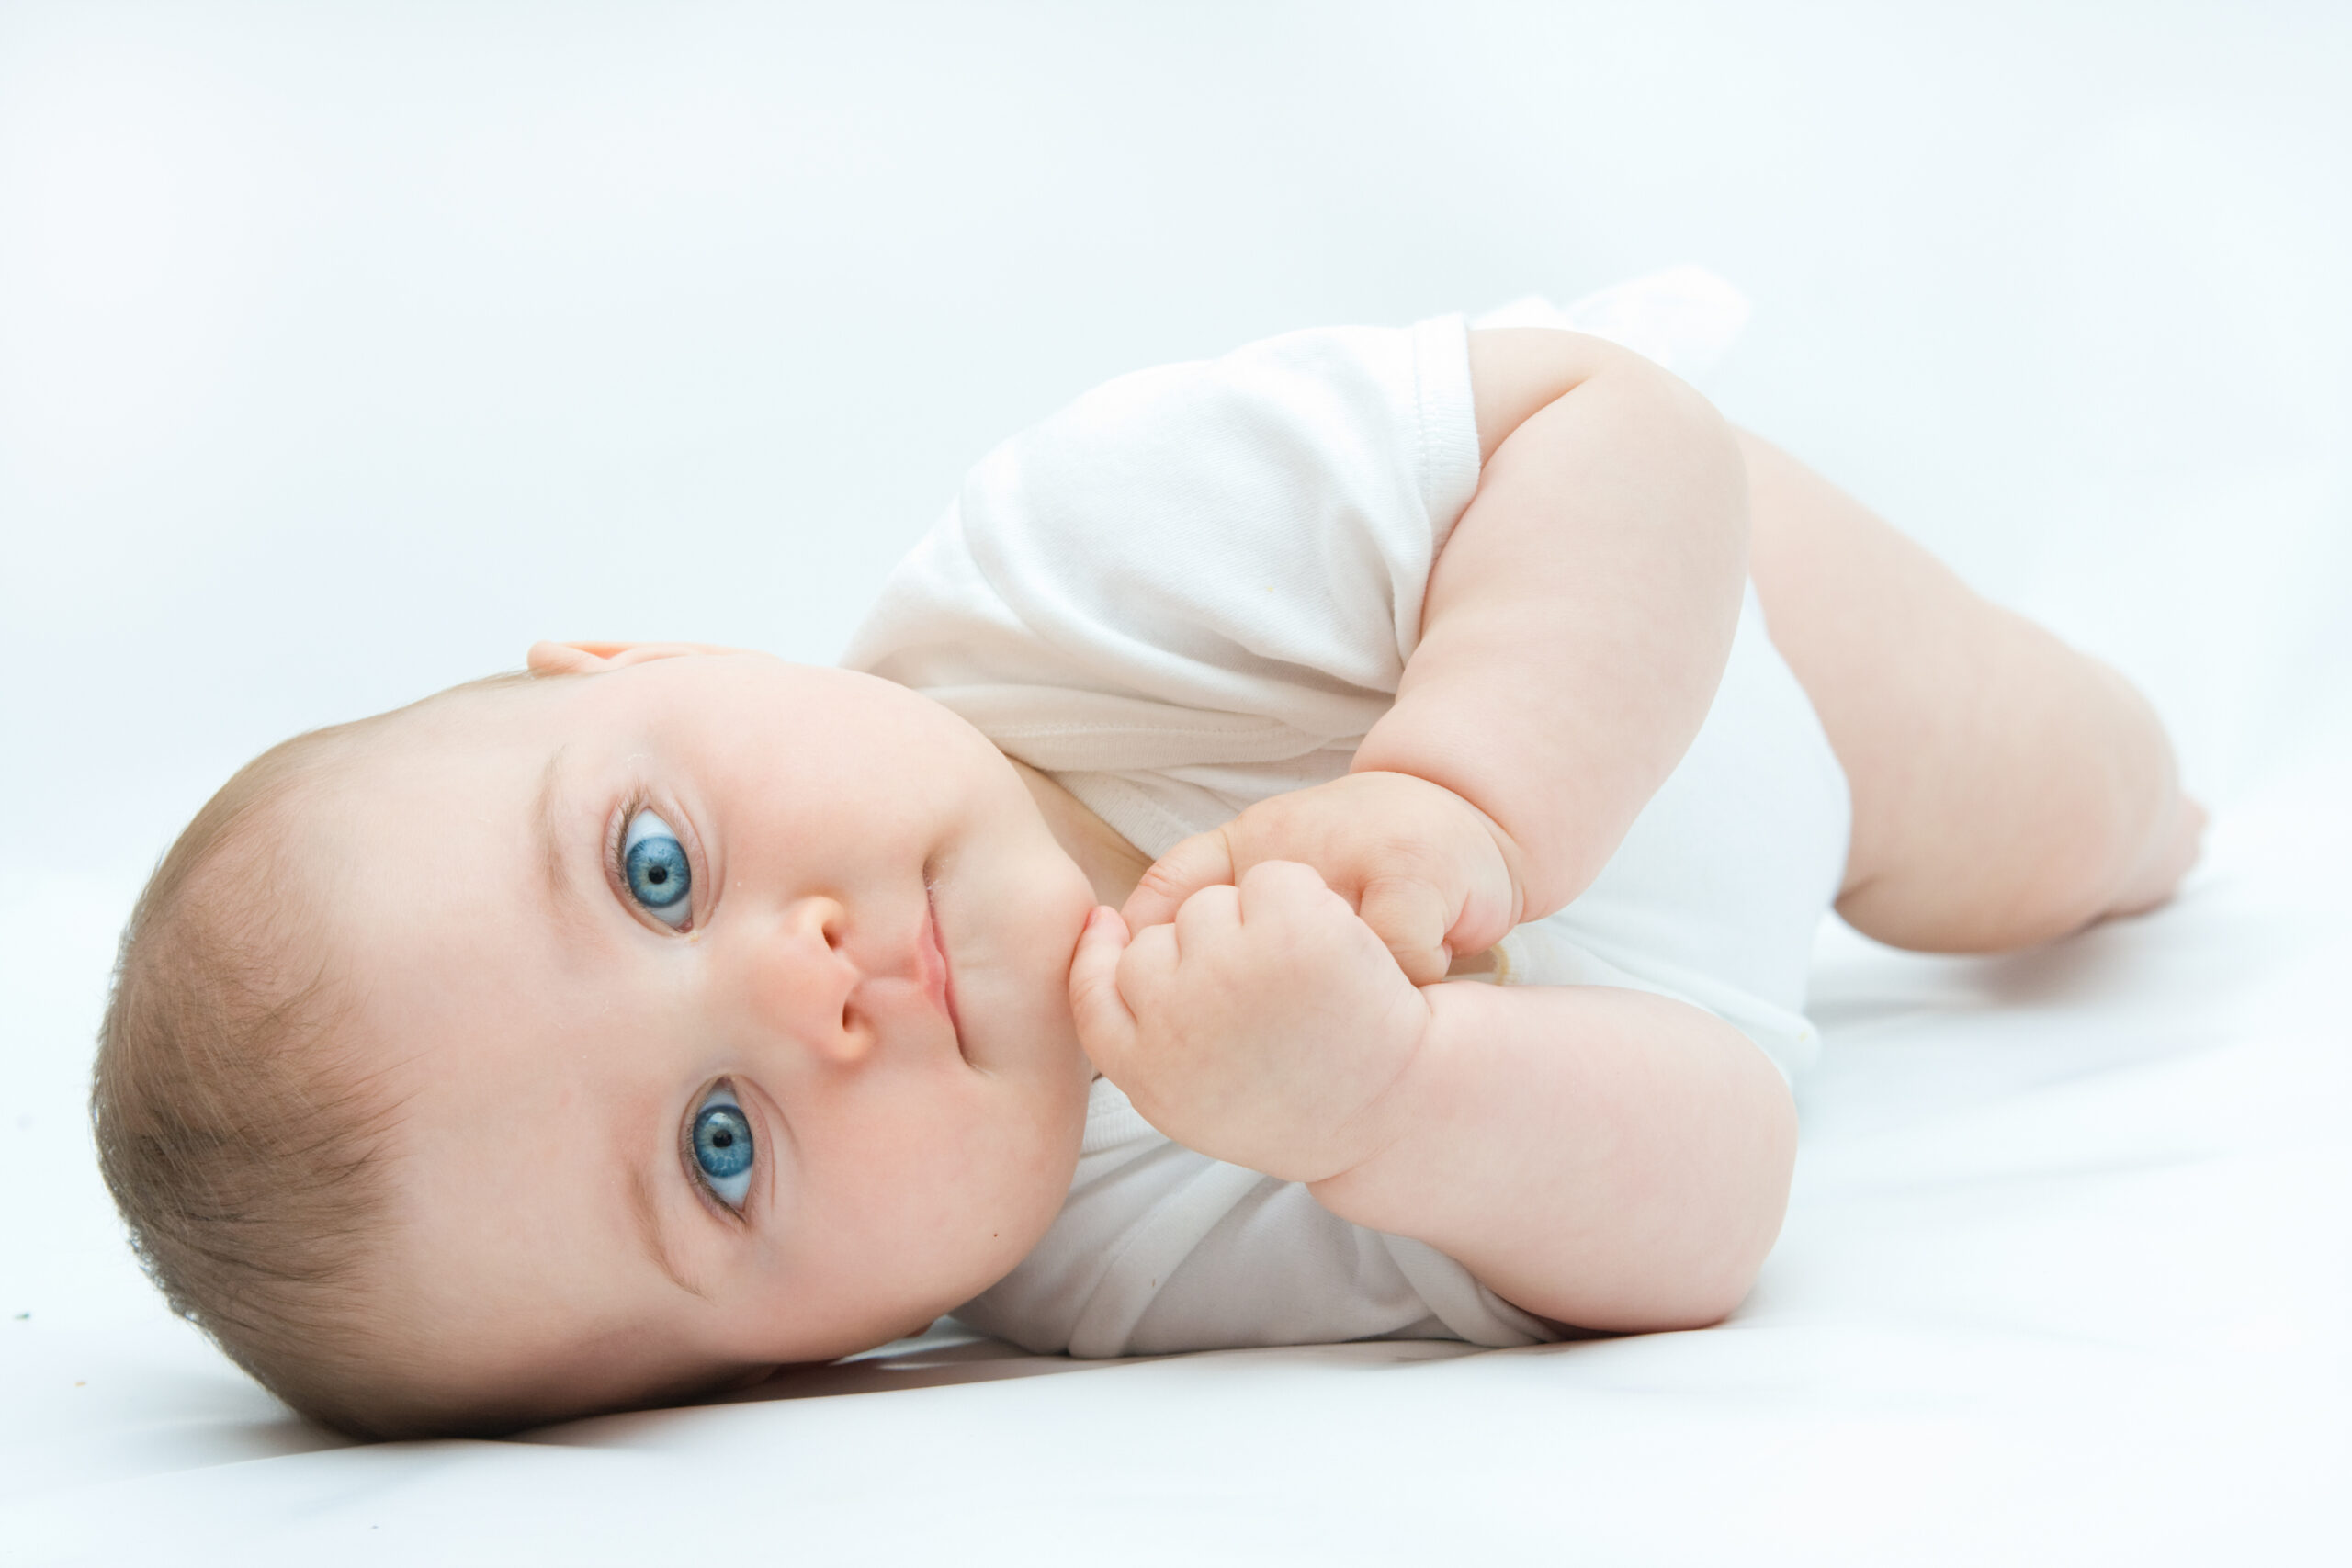 Are All Babies Born with Blue Eyes?